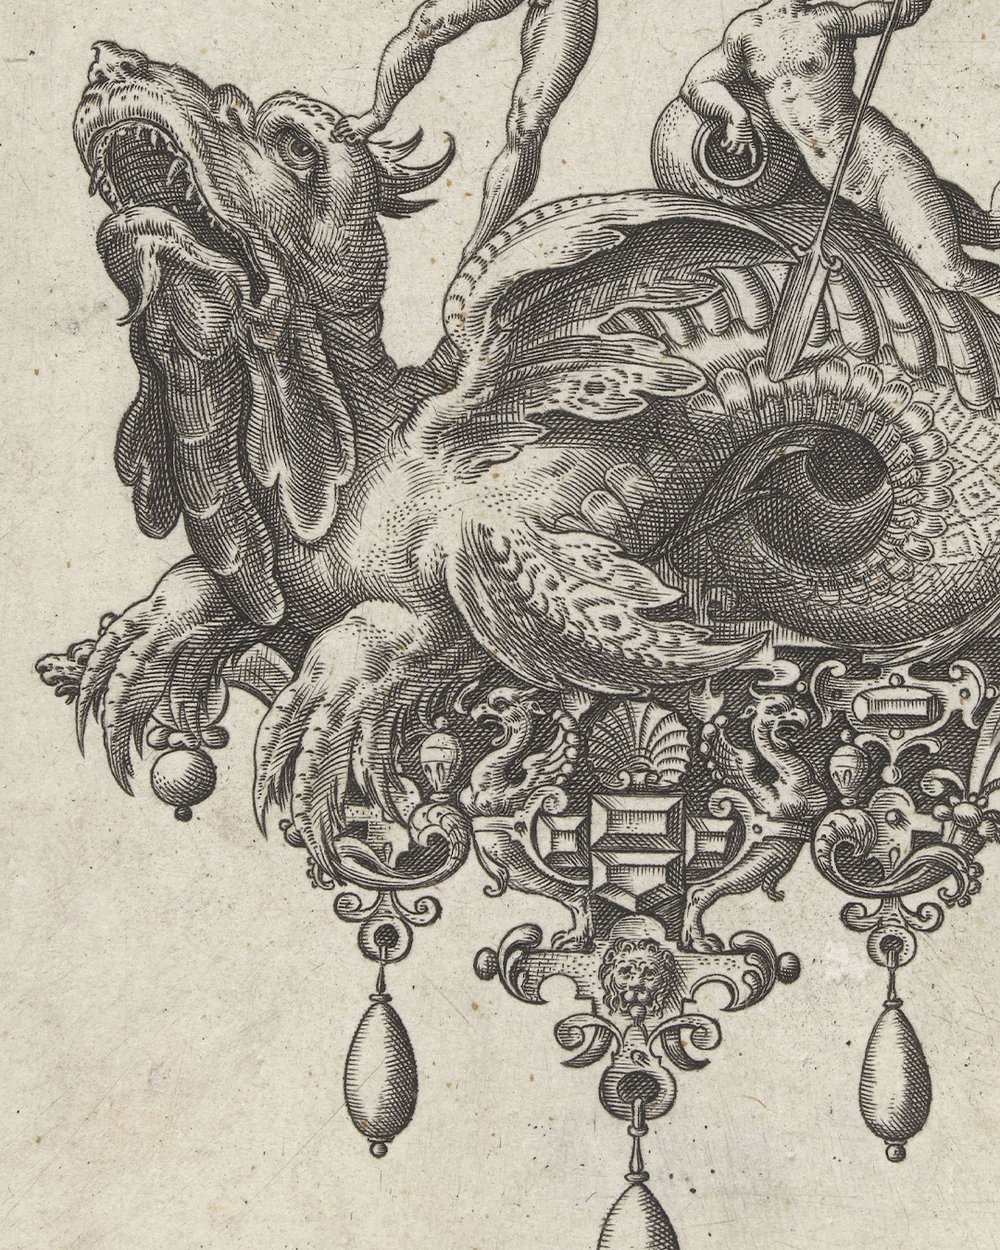 ''Pendant with sea dragon, on his back is a man with a sail'' (1582)